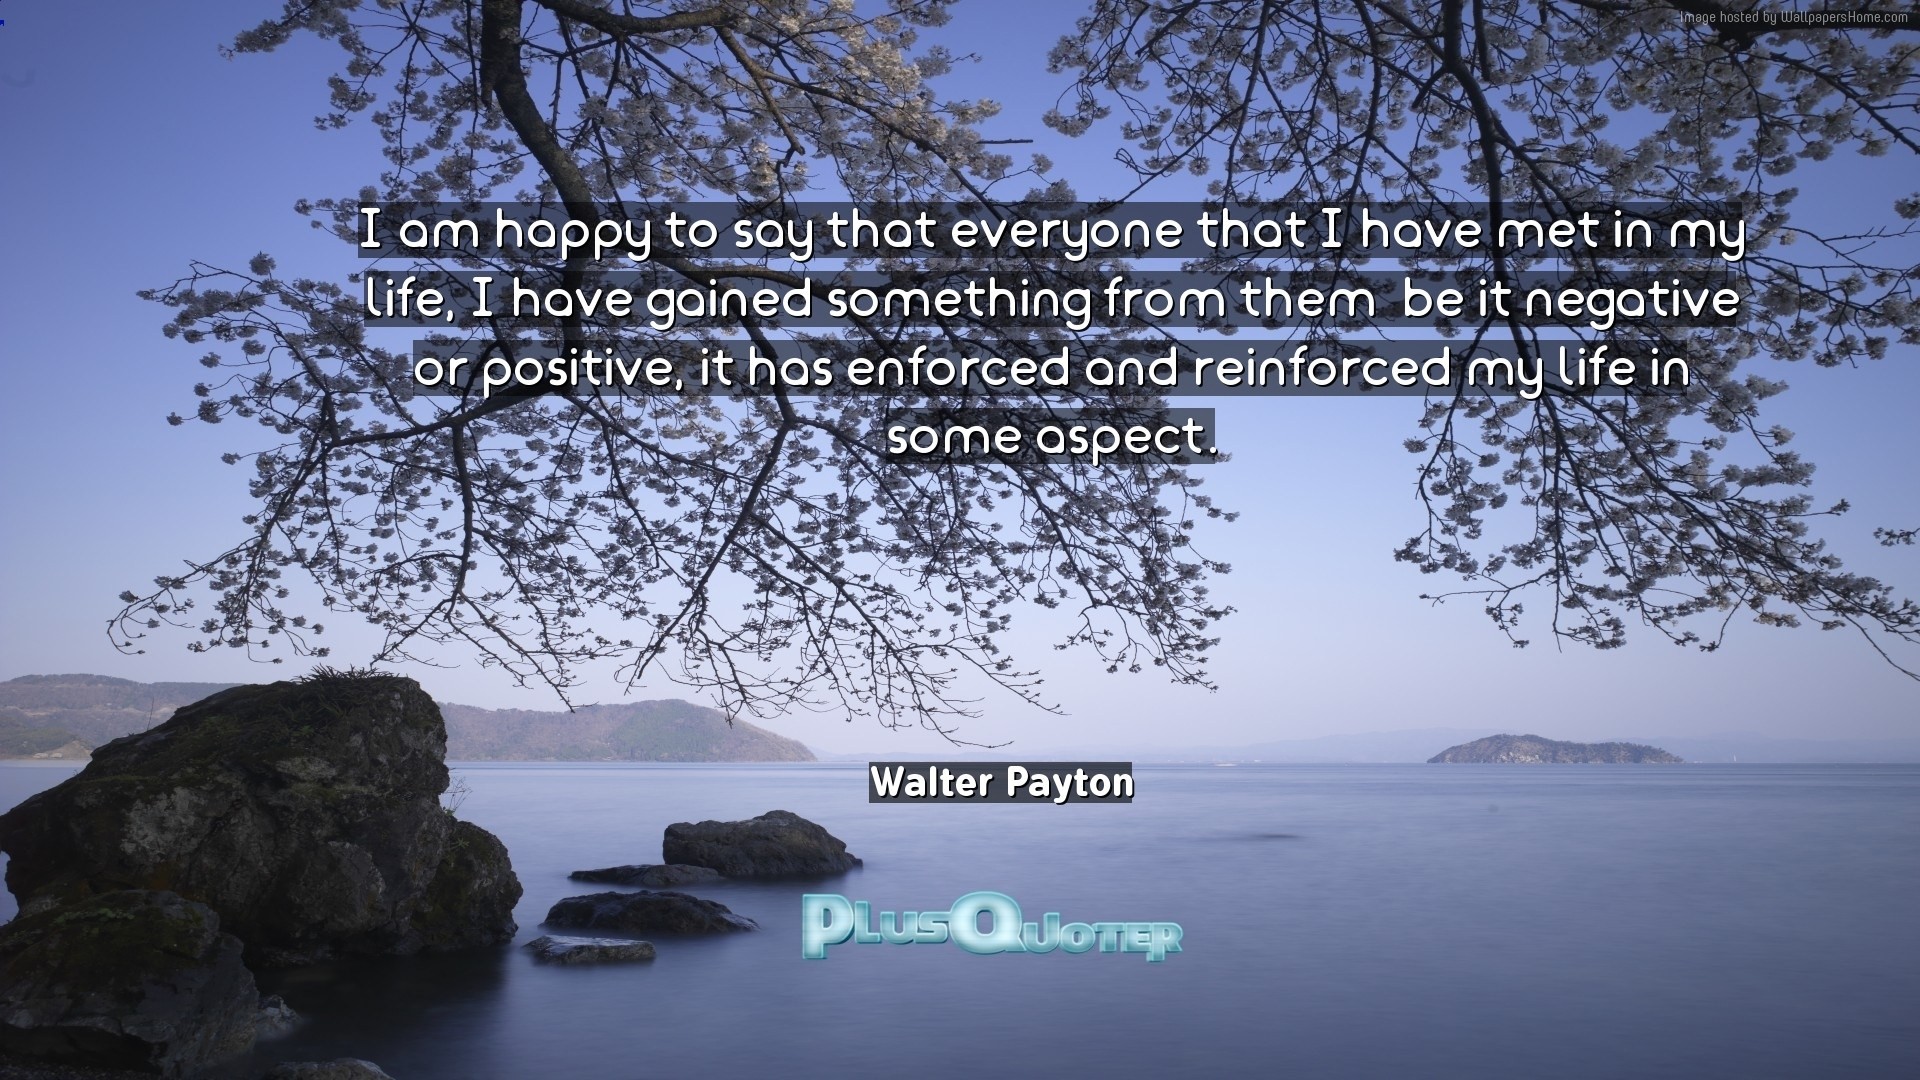 Walter Payton Quote Work Hard Or Don T Work At All - Wallpaper - HD Wallpaper 